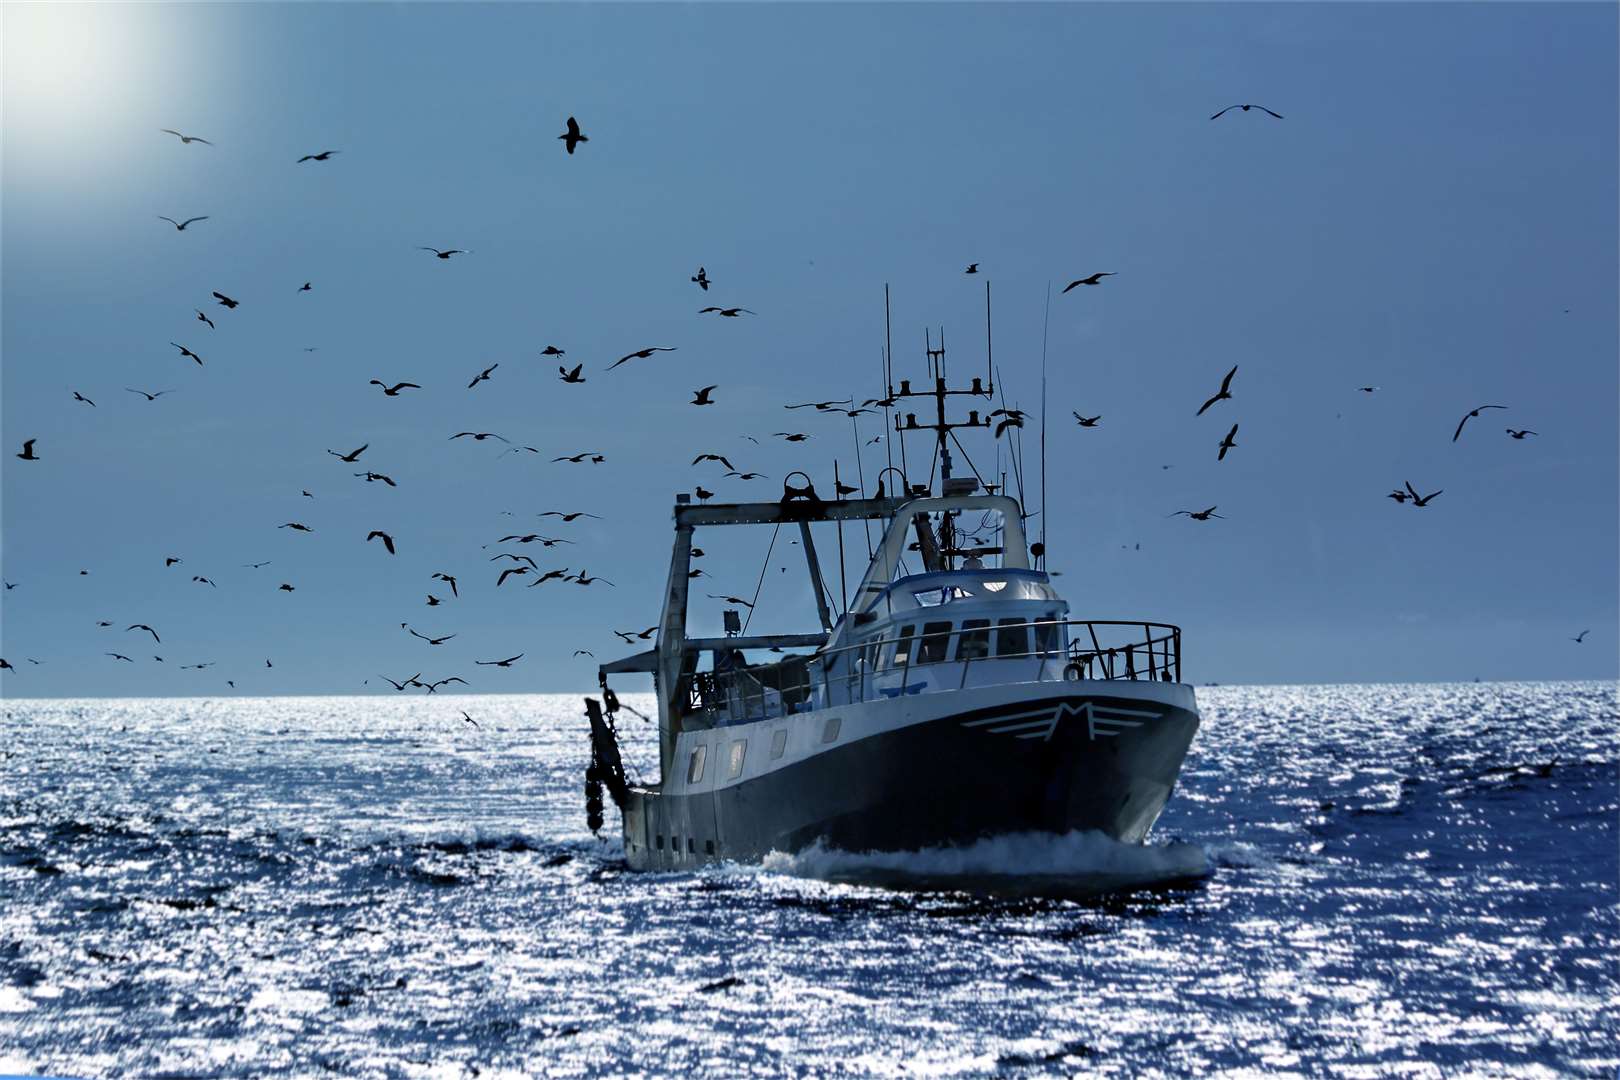 Fishermen are among those facing the 'stark realities of a new operating landscape', Mairi Gougeon said.